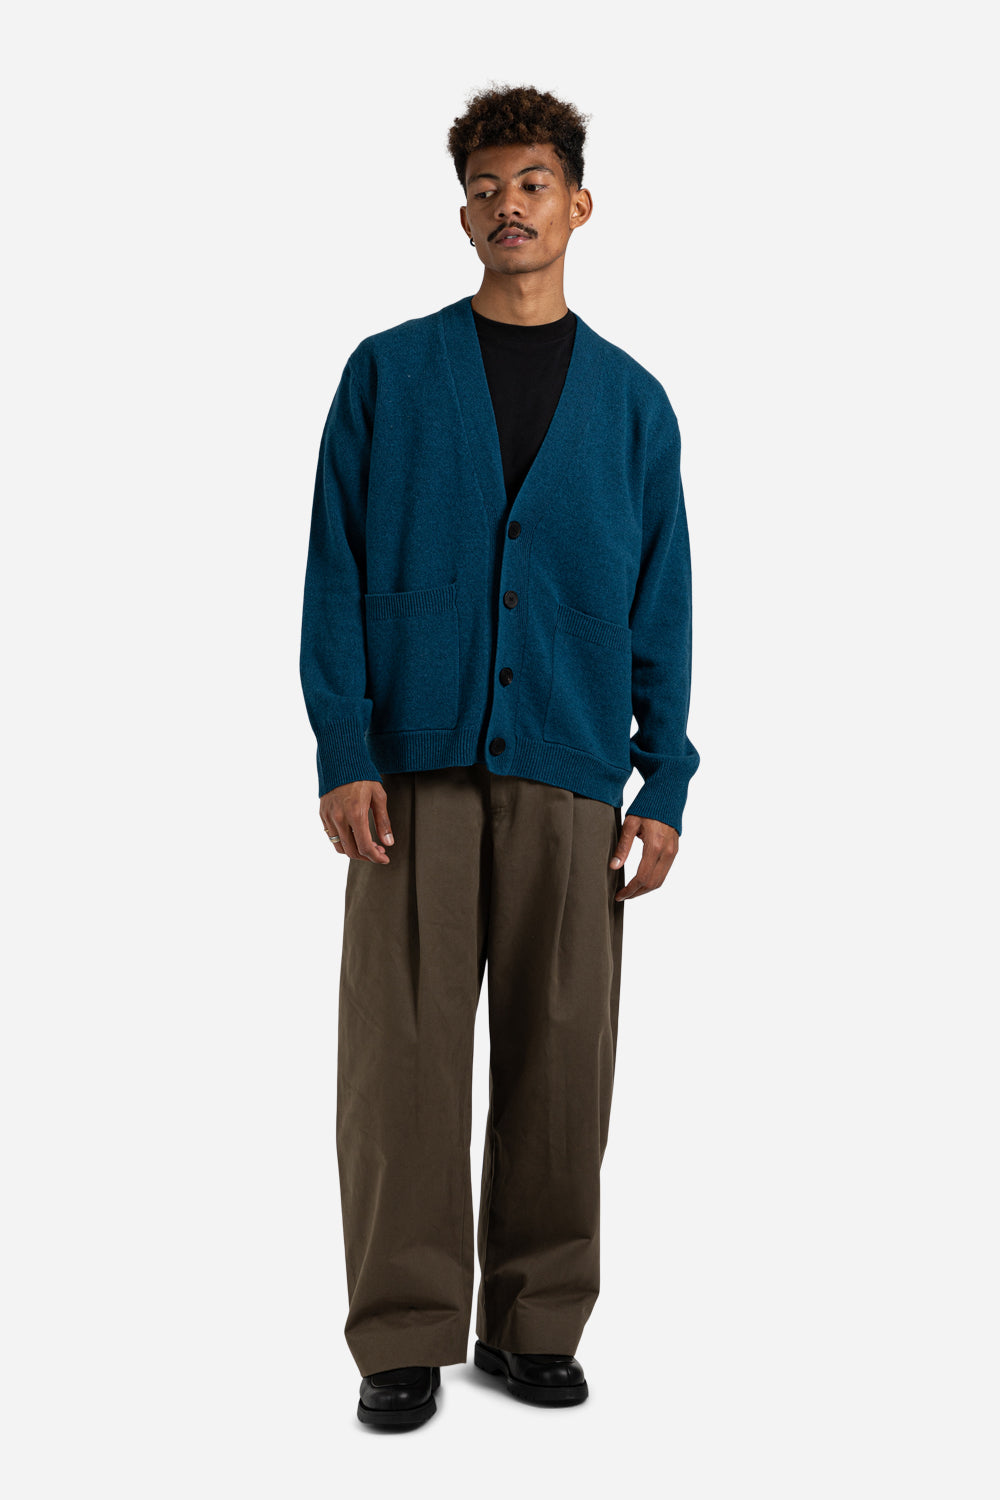 Studio Nicholson Aire Knit Cardigan in Diesel - Wallace Mercantile Sho